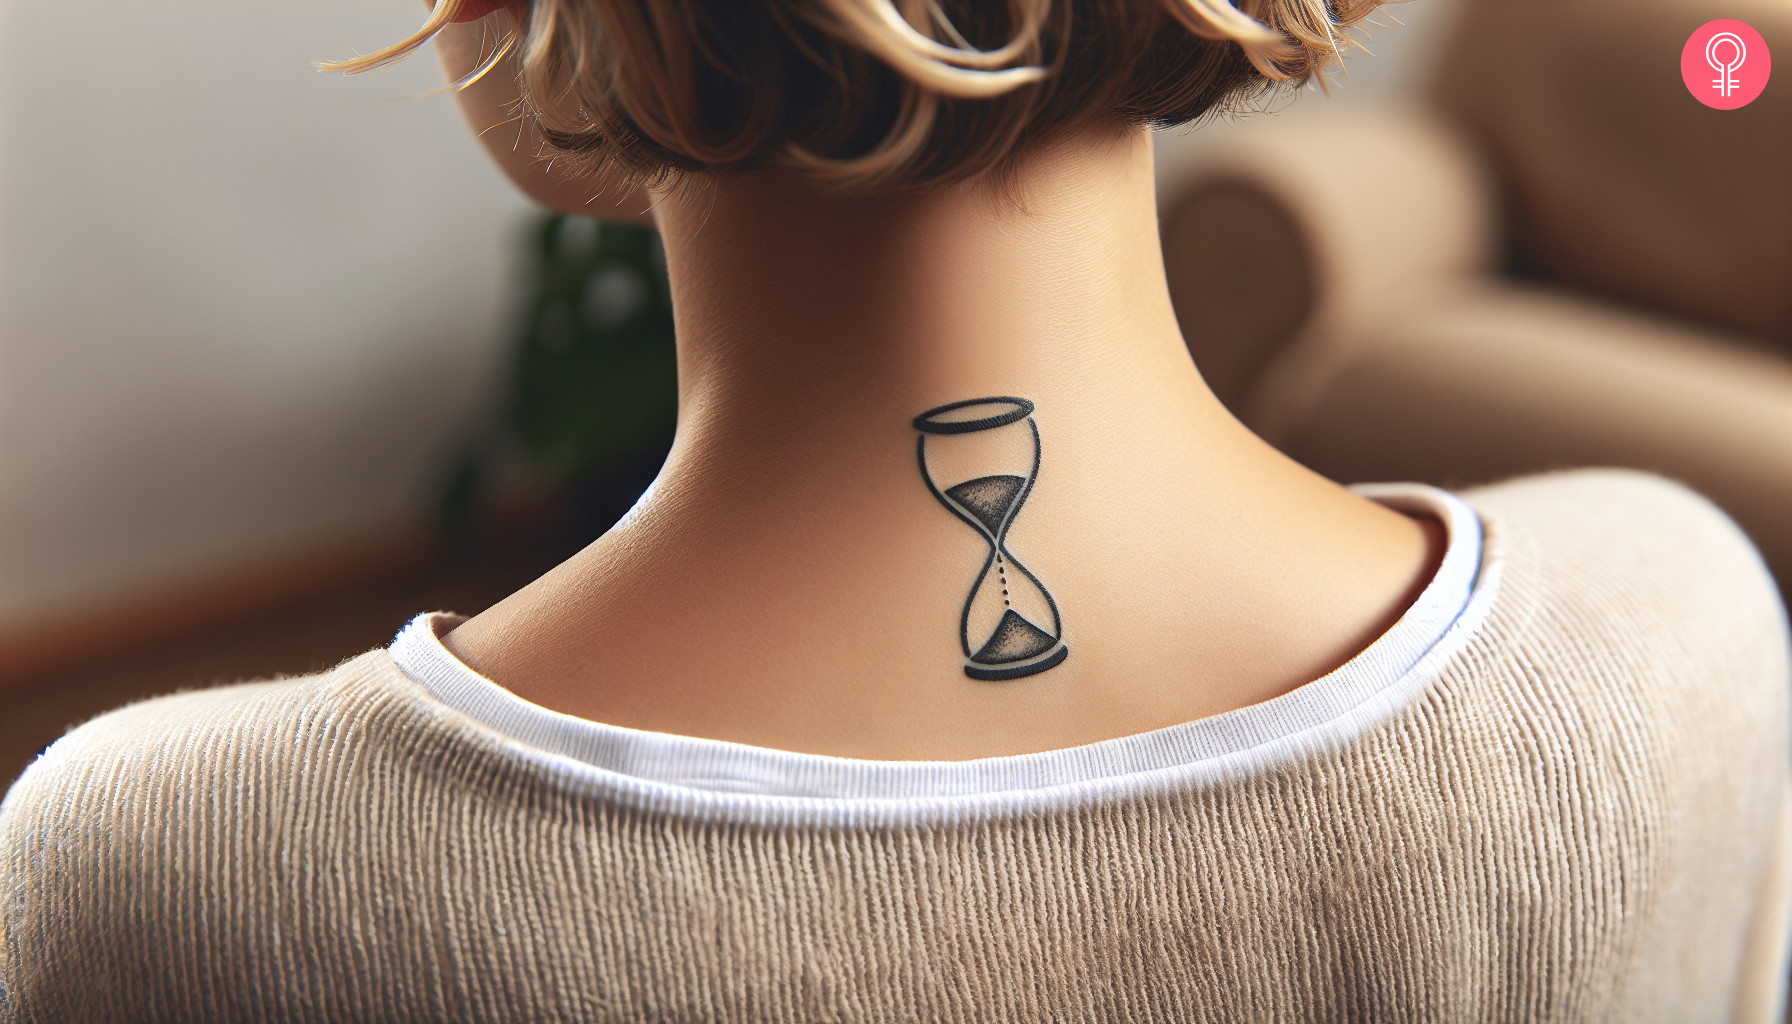 Woman with hourglass outline tattoo on her upper back